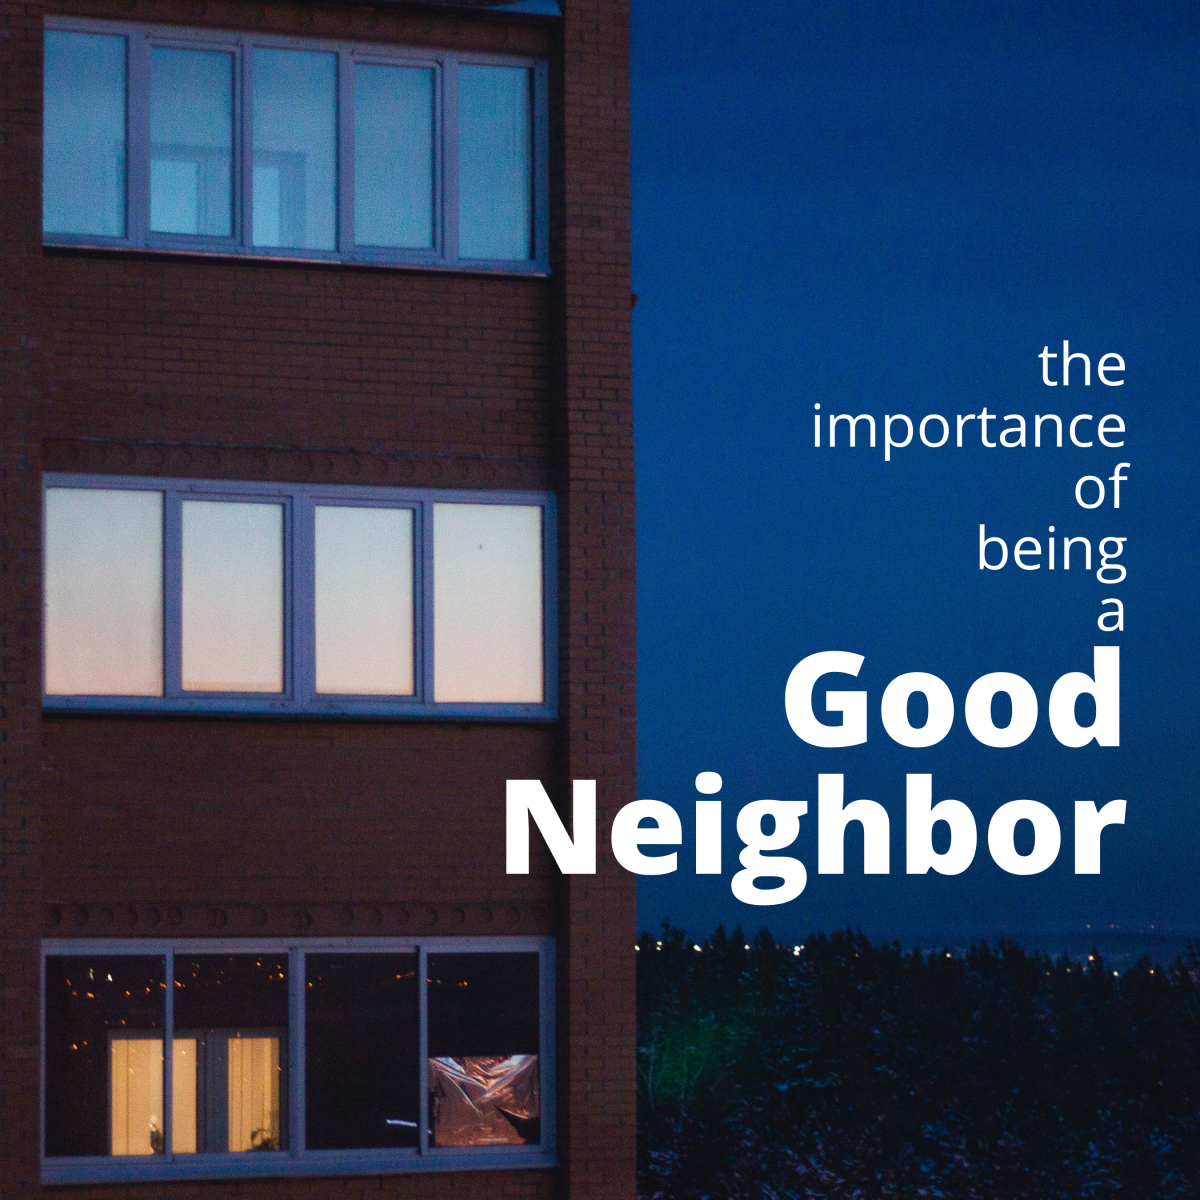 Reasons why it's important to be a good neighbor.